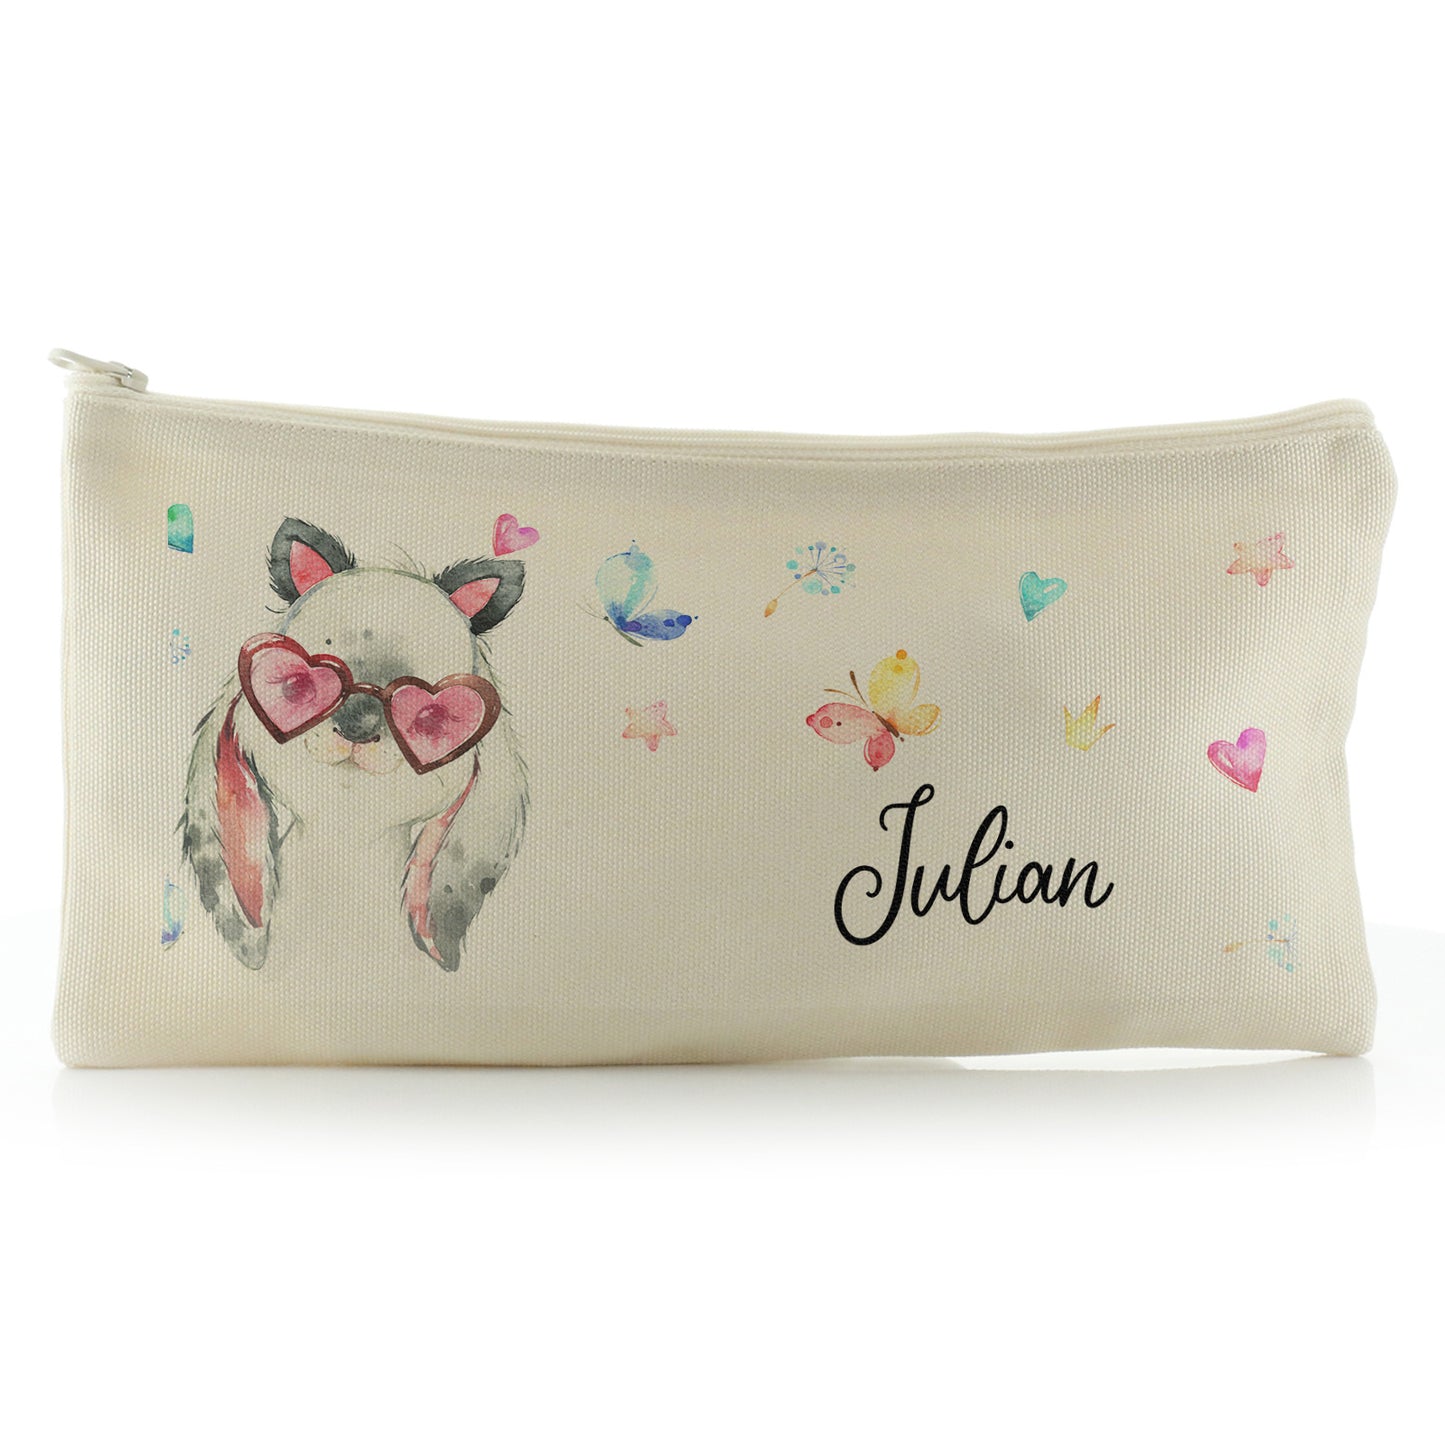 Personalised Canvas Zip Bag with Grey Rabbit with Cat ears and Pink Heart Glasses and Cute Text